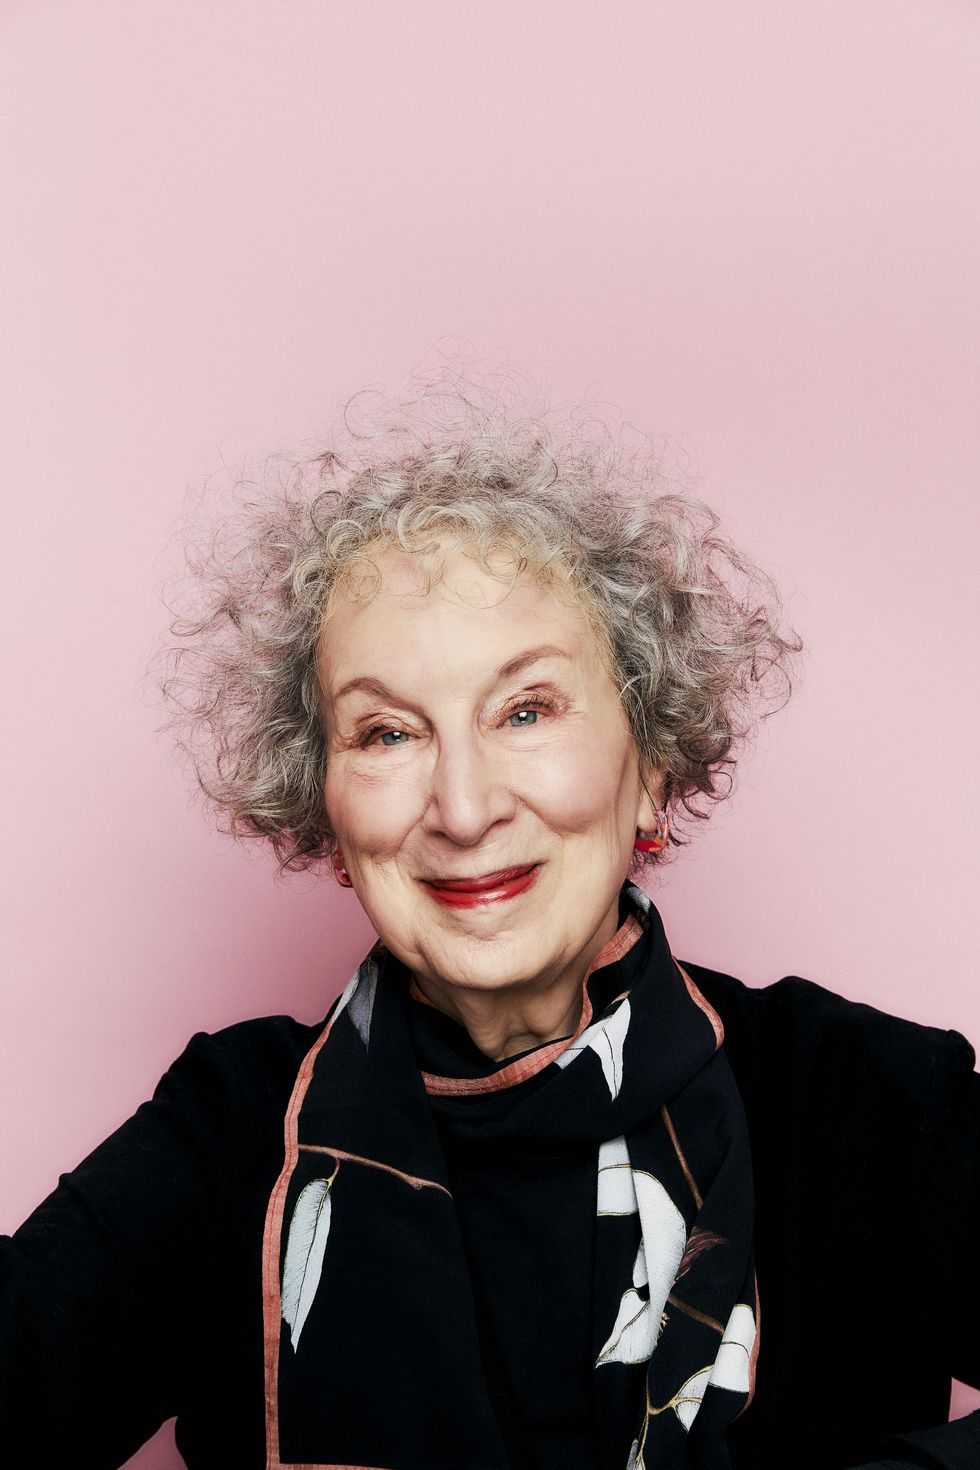 margaret atwood by luis mora